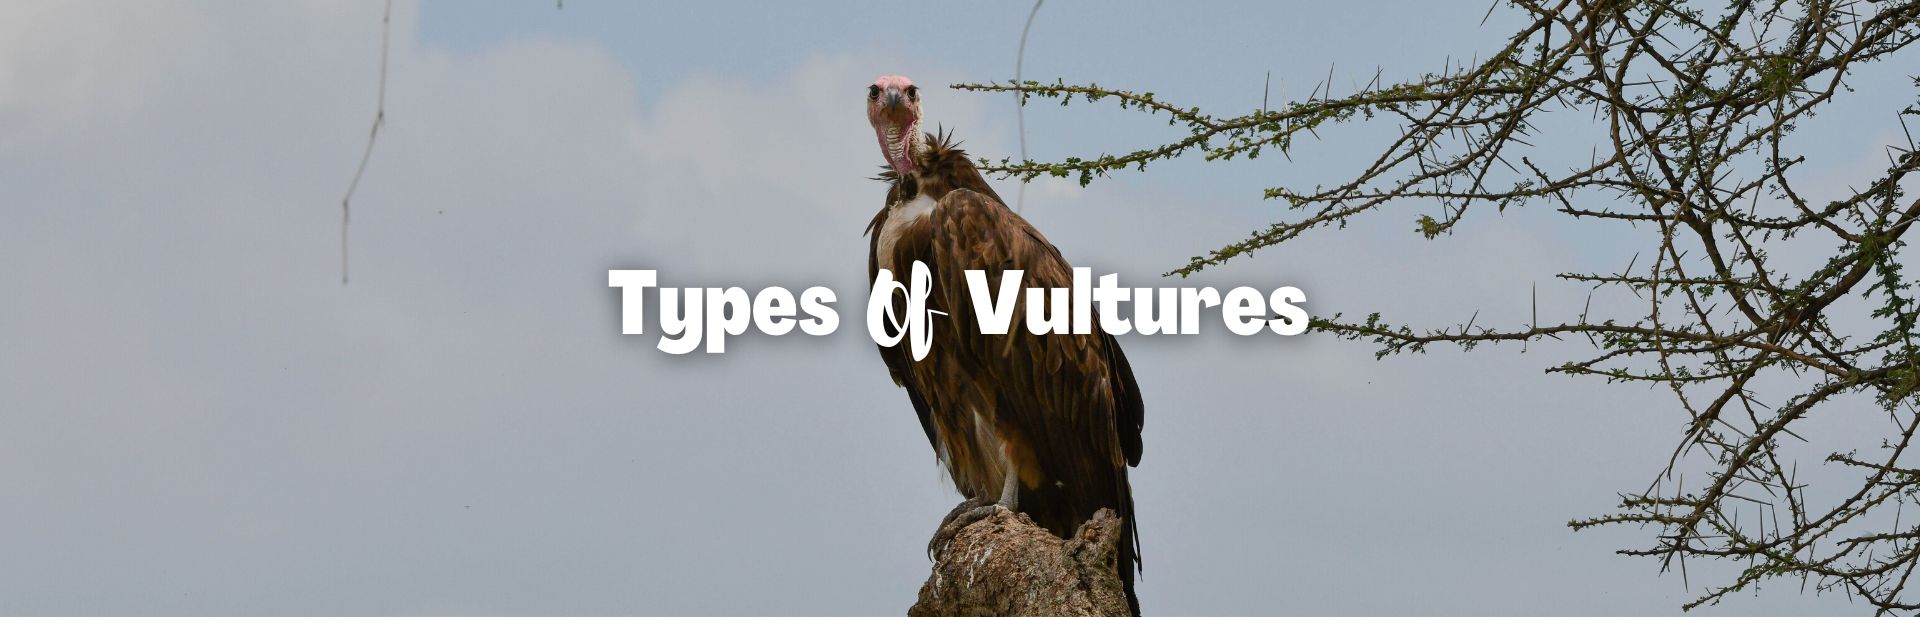 23 Types of Vultures: Nature’s Clean-Up Crew